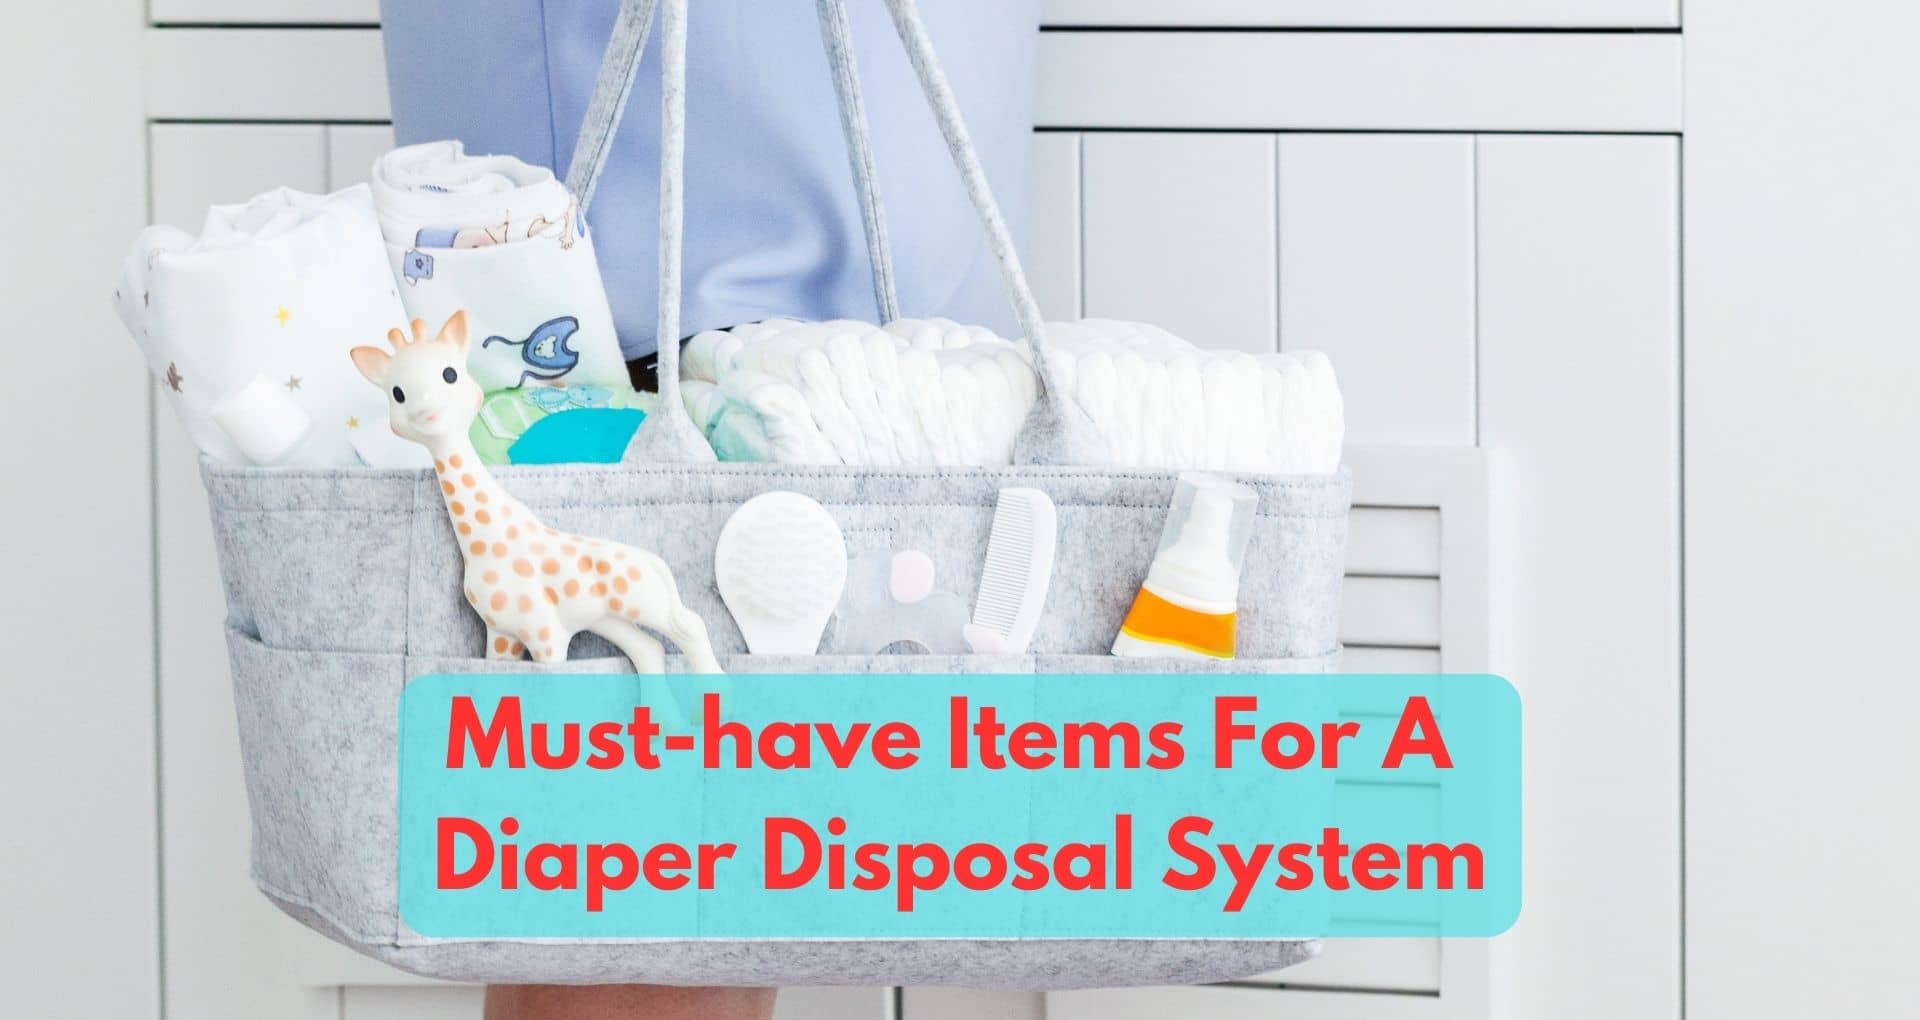 What Are The Must-have Items For A Diaper Disposal System?